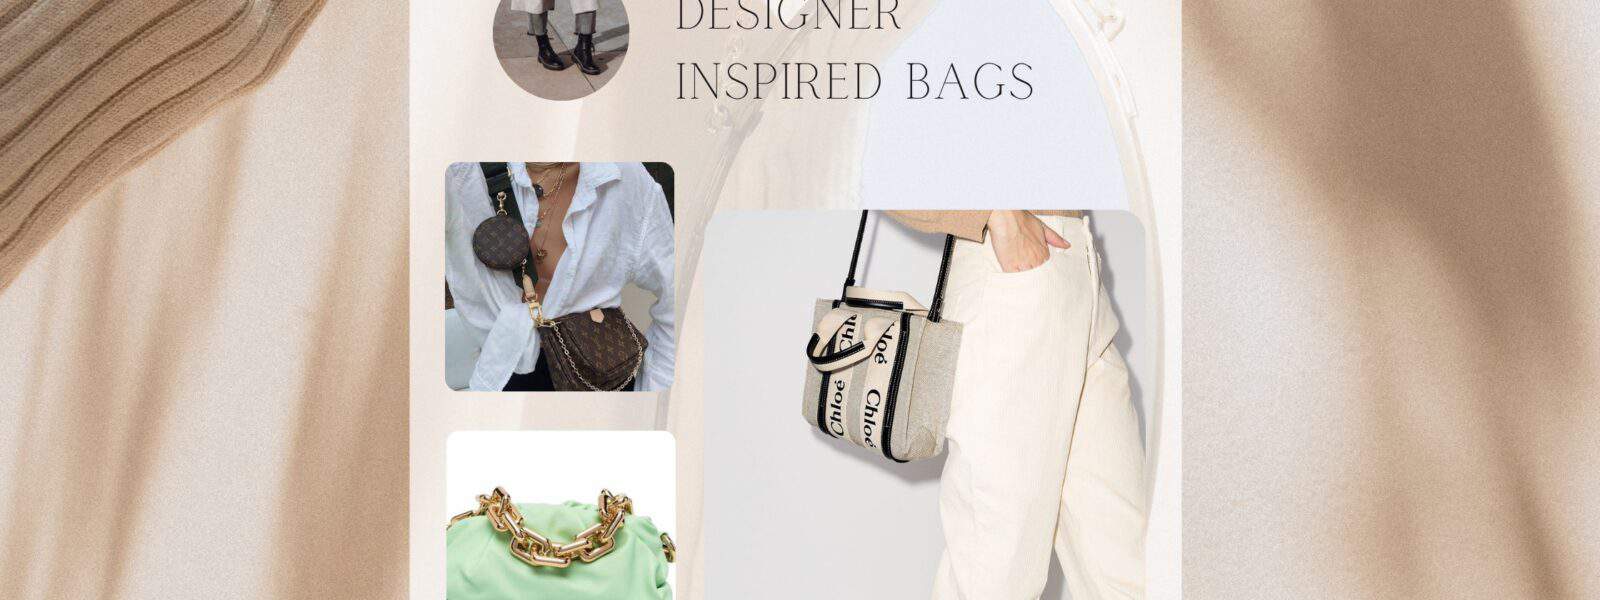 How to find the designer inspired bag you want on DH Gate